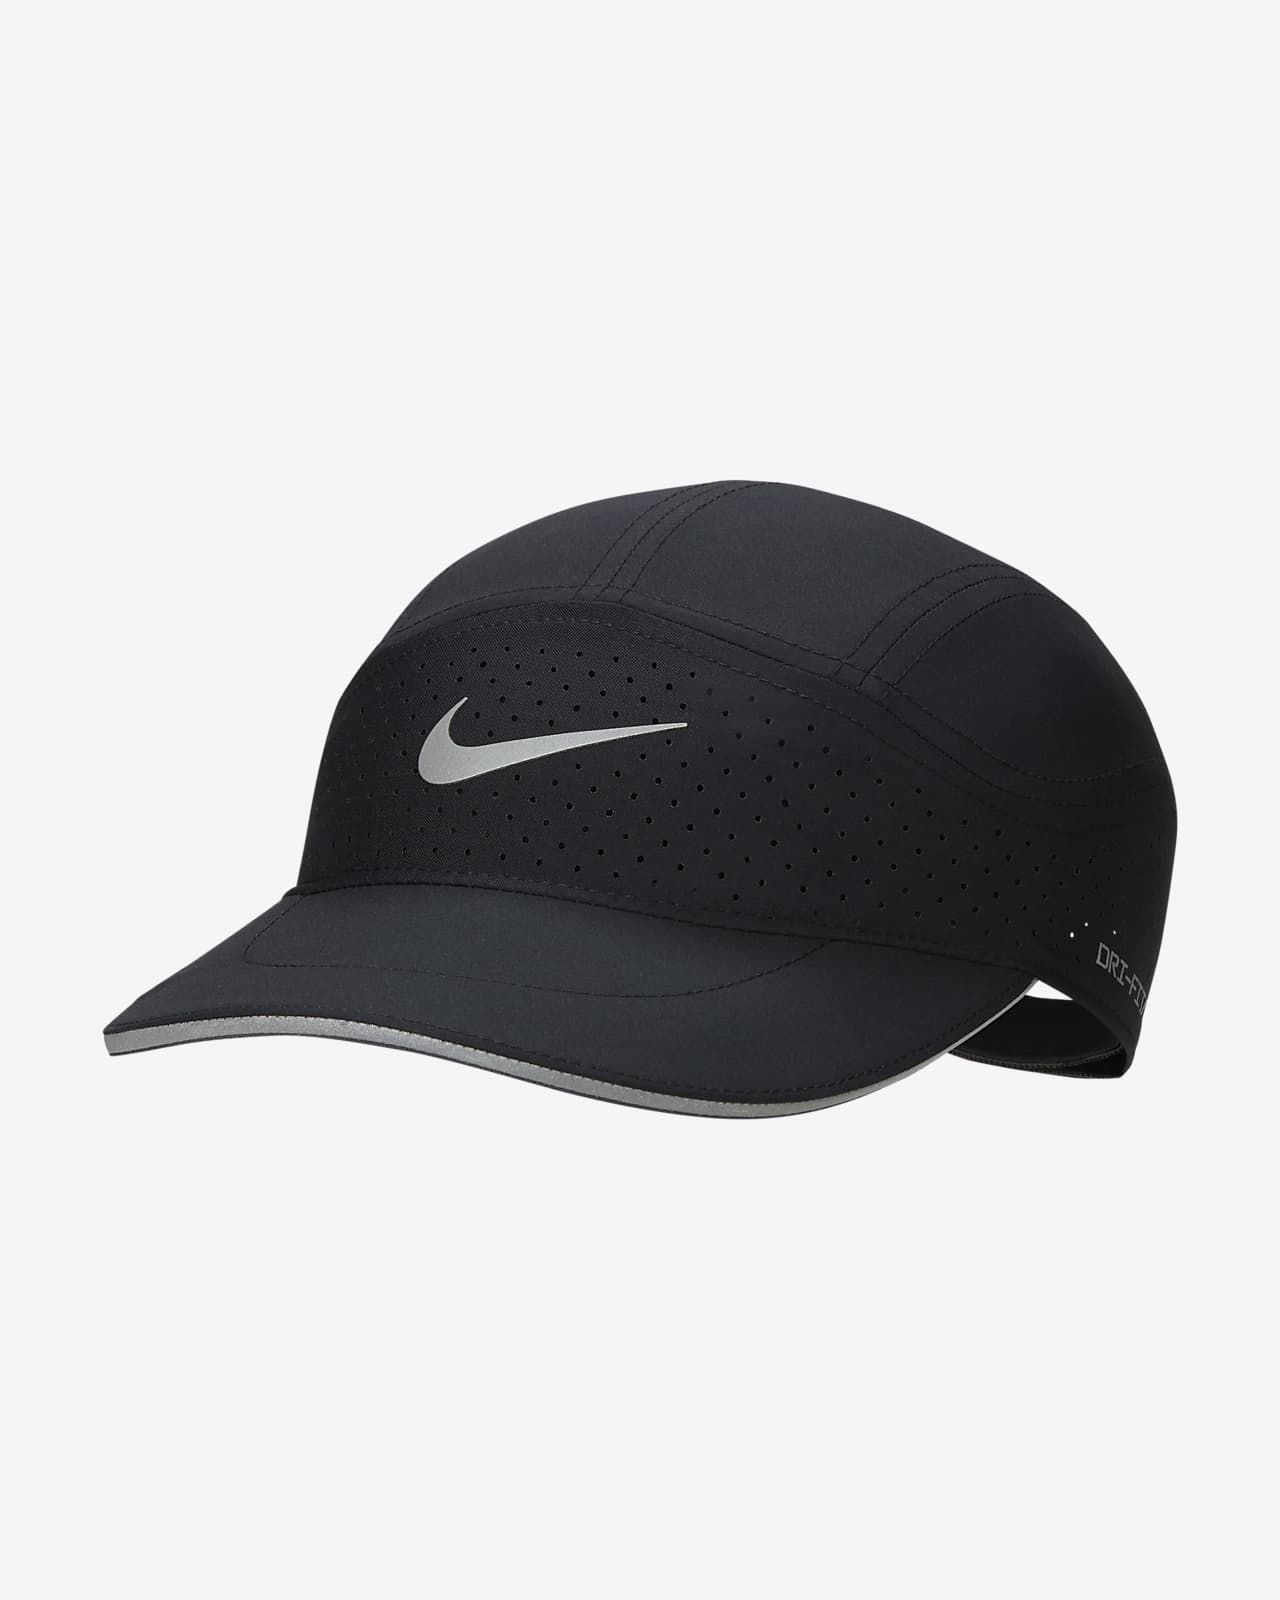 Nike Dri-FIT ADV Fly Unstructured Reflective Cap. Nike.com | Nike (US)